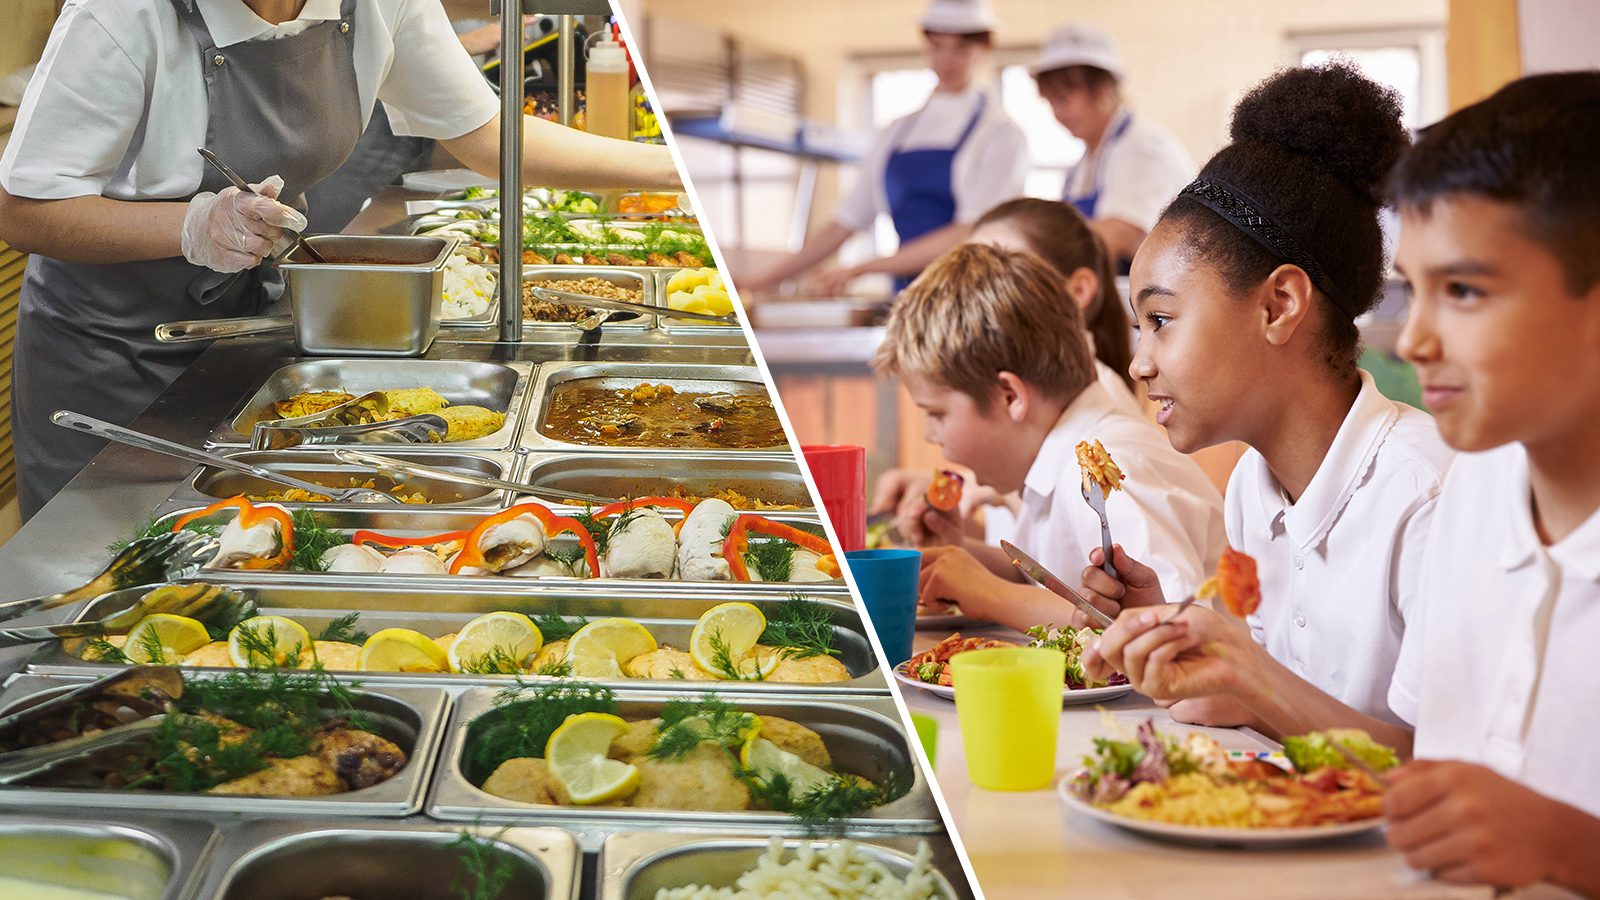 California Became First State to Offer All School Children Free Breakfast and Lunch